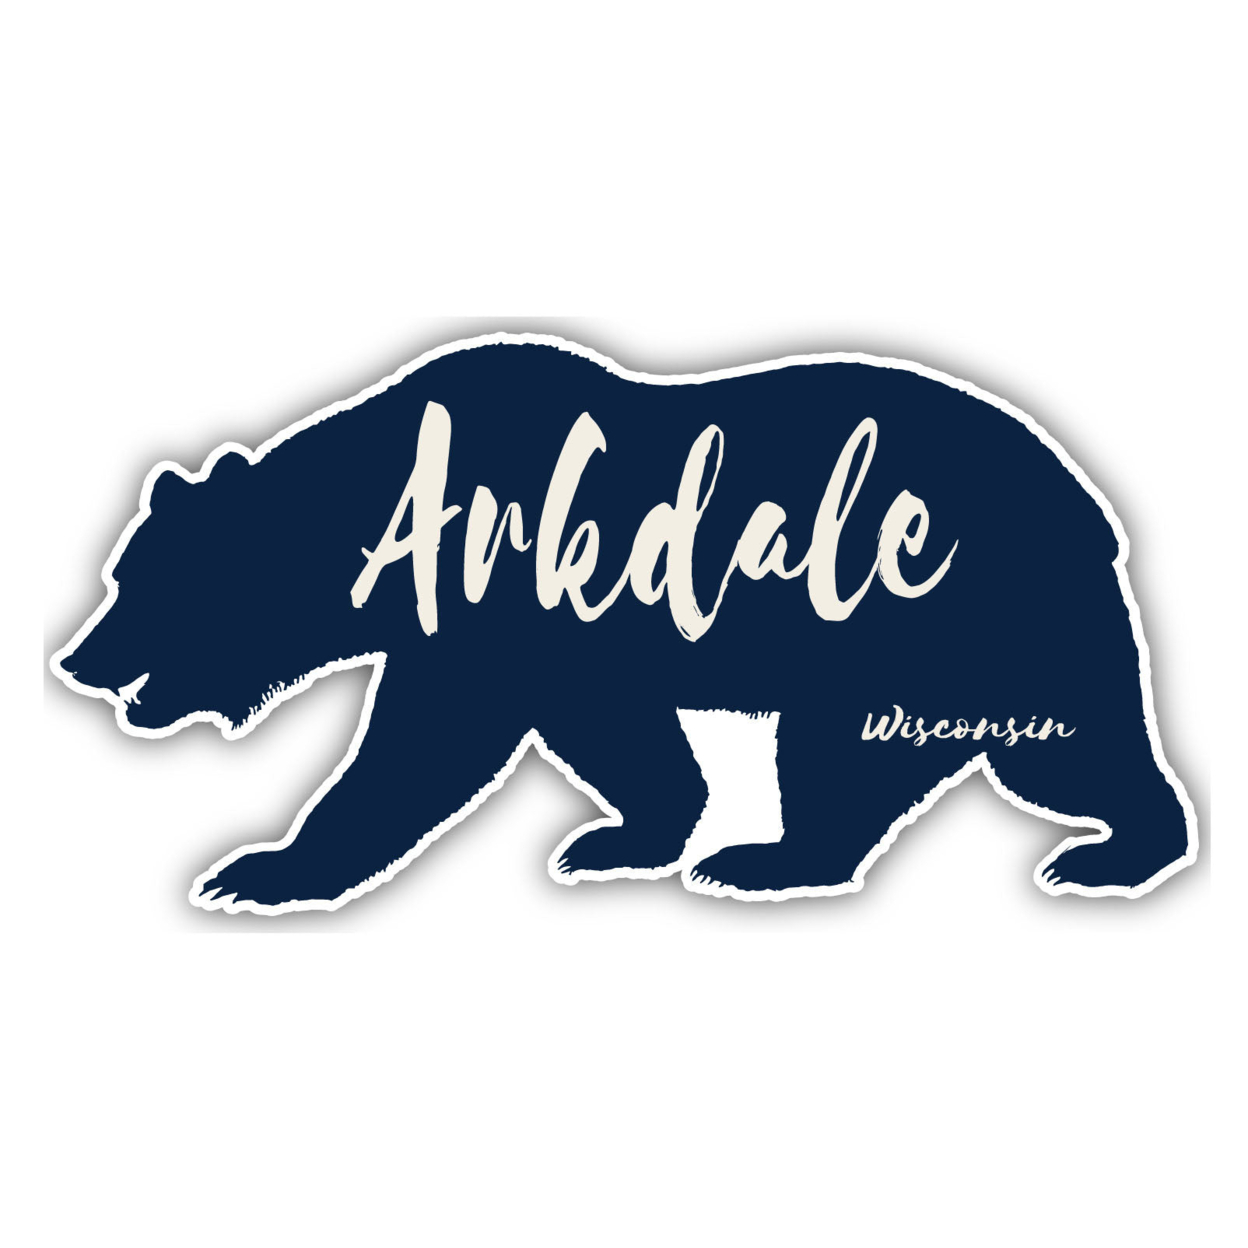 Arkdale Wisconsin Souvenir Decorative Stickers (Choose Theme And Size) - Single Unit, 12-Inch, Bear